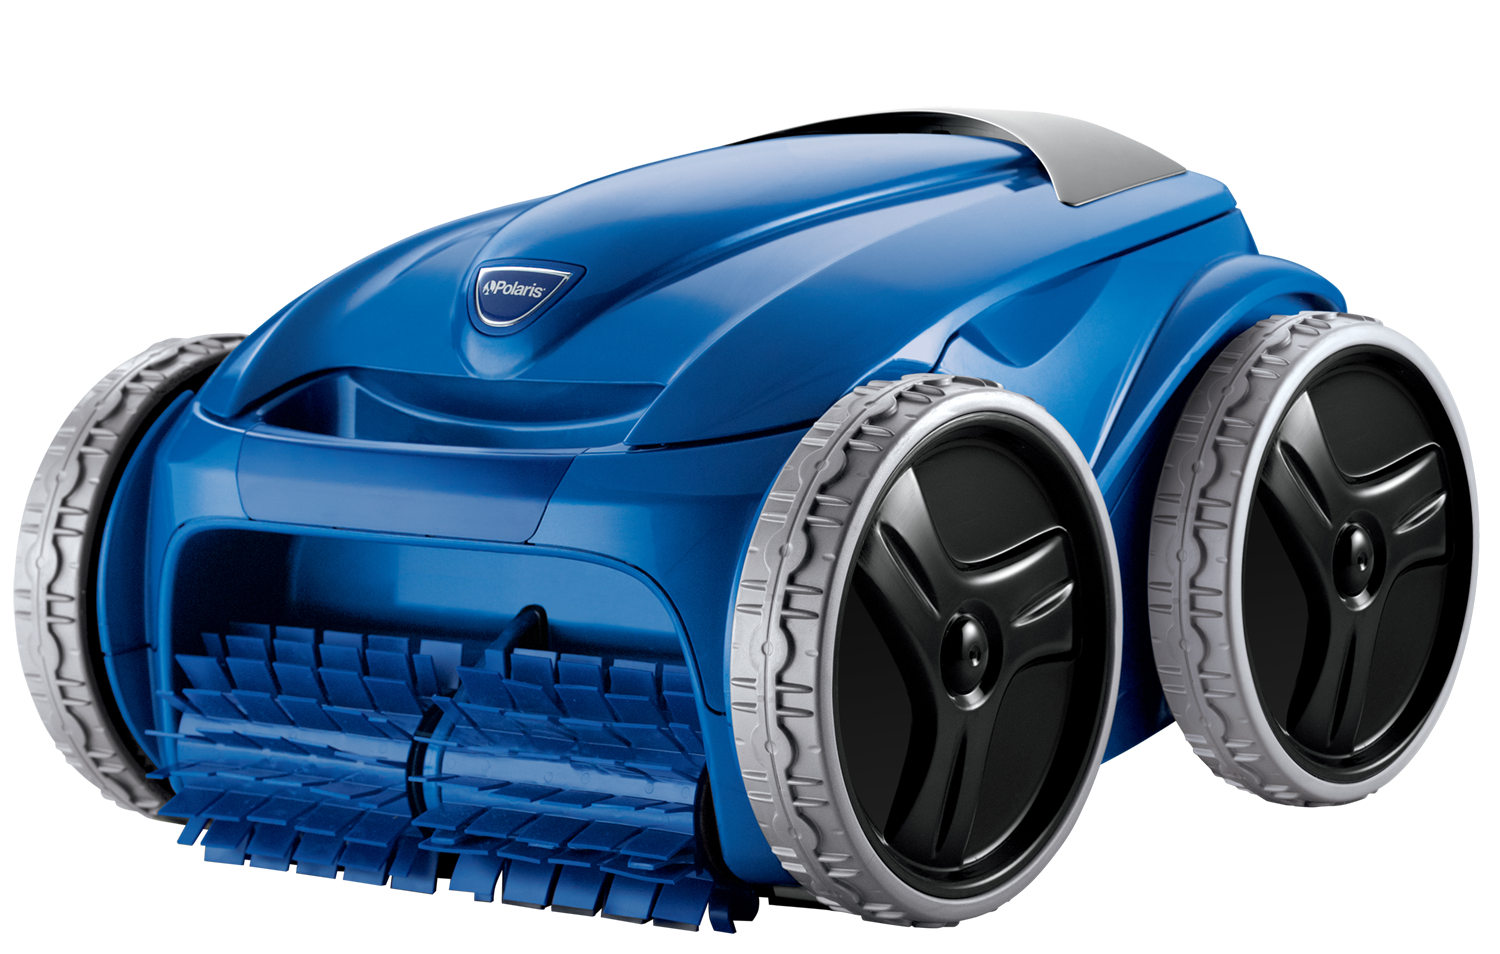 Polaris F945 Robotic Pool Cleaner with 4WD